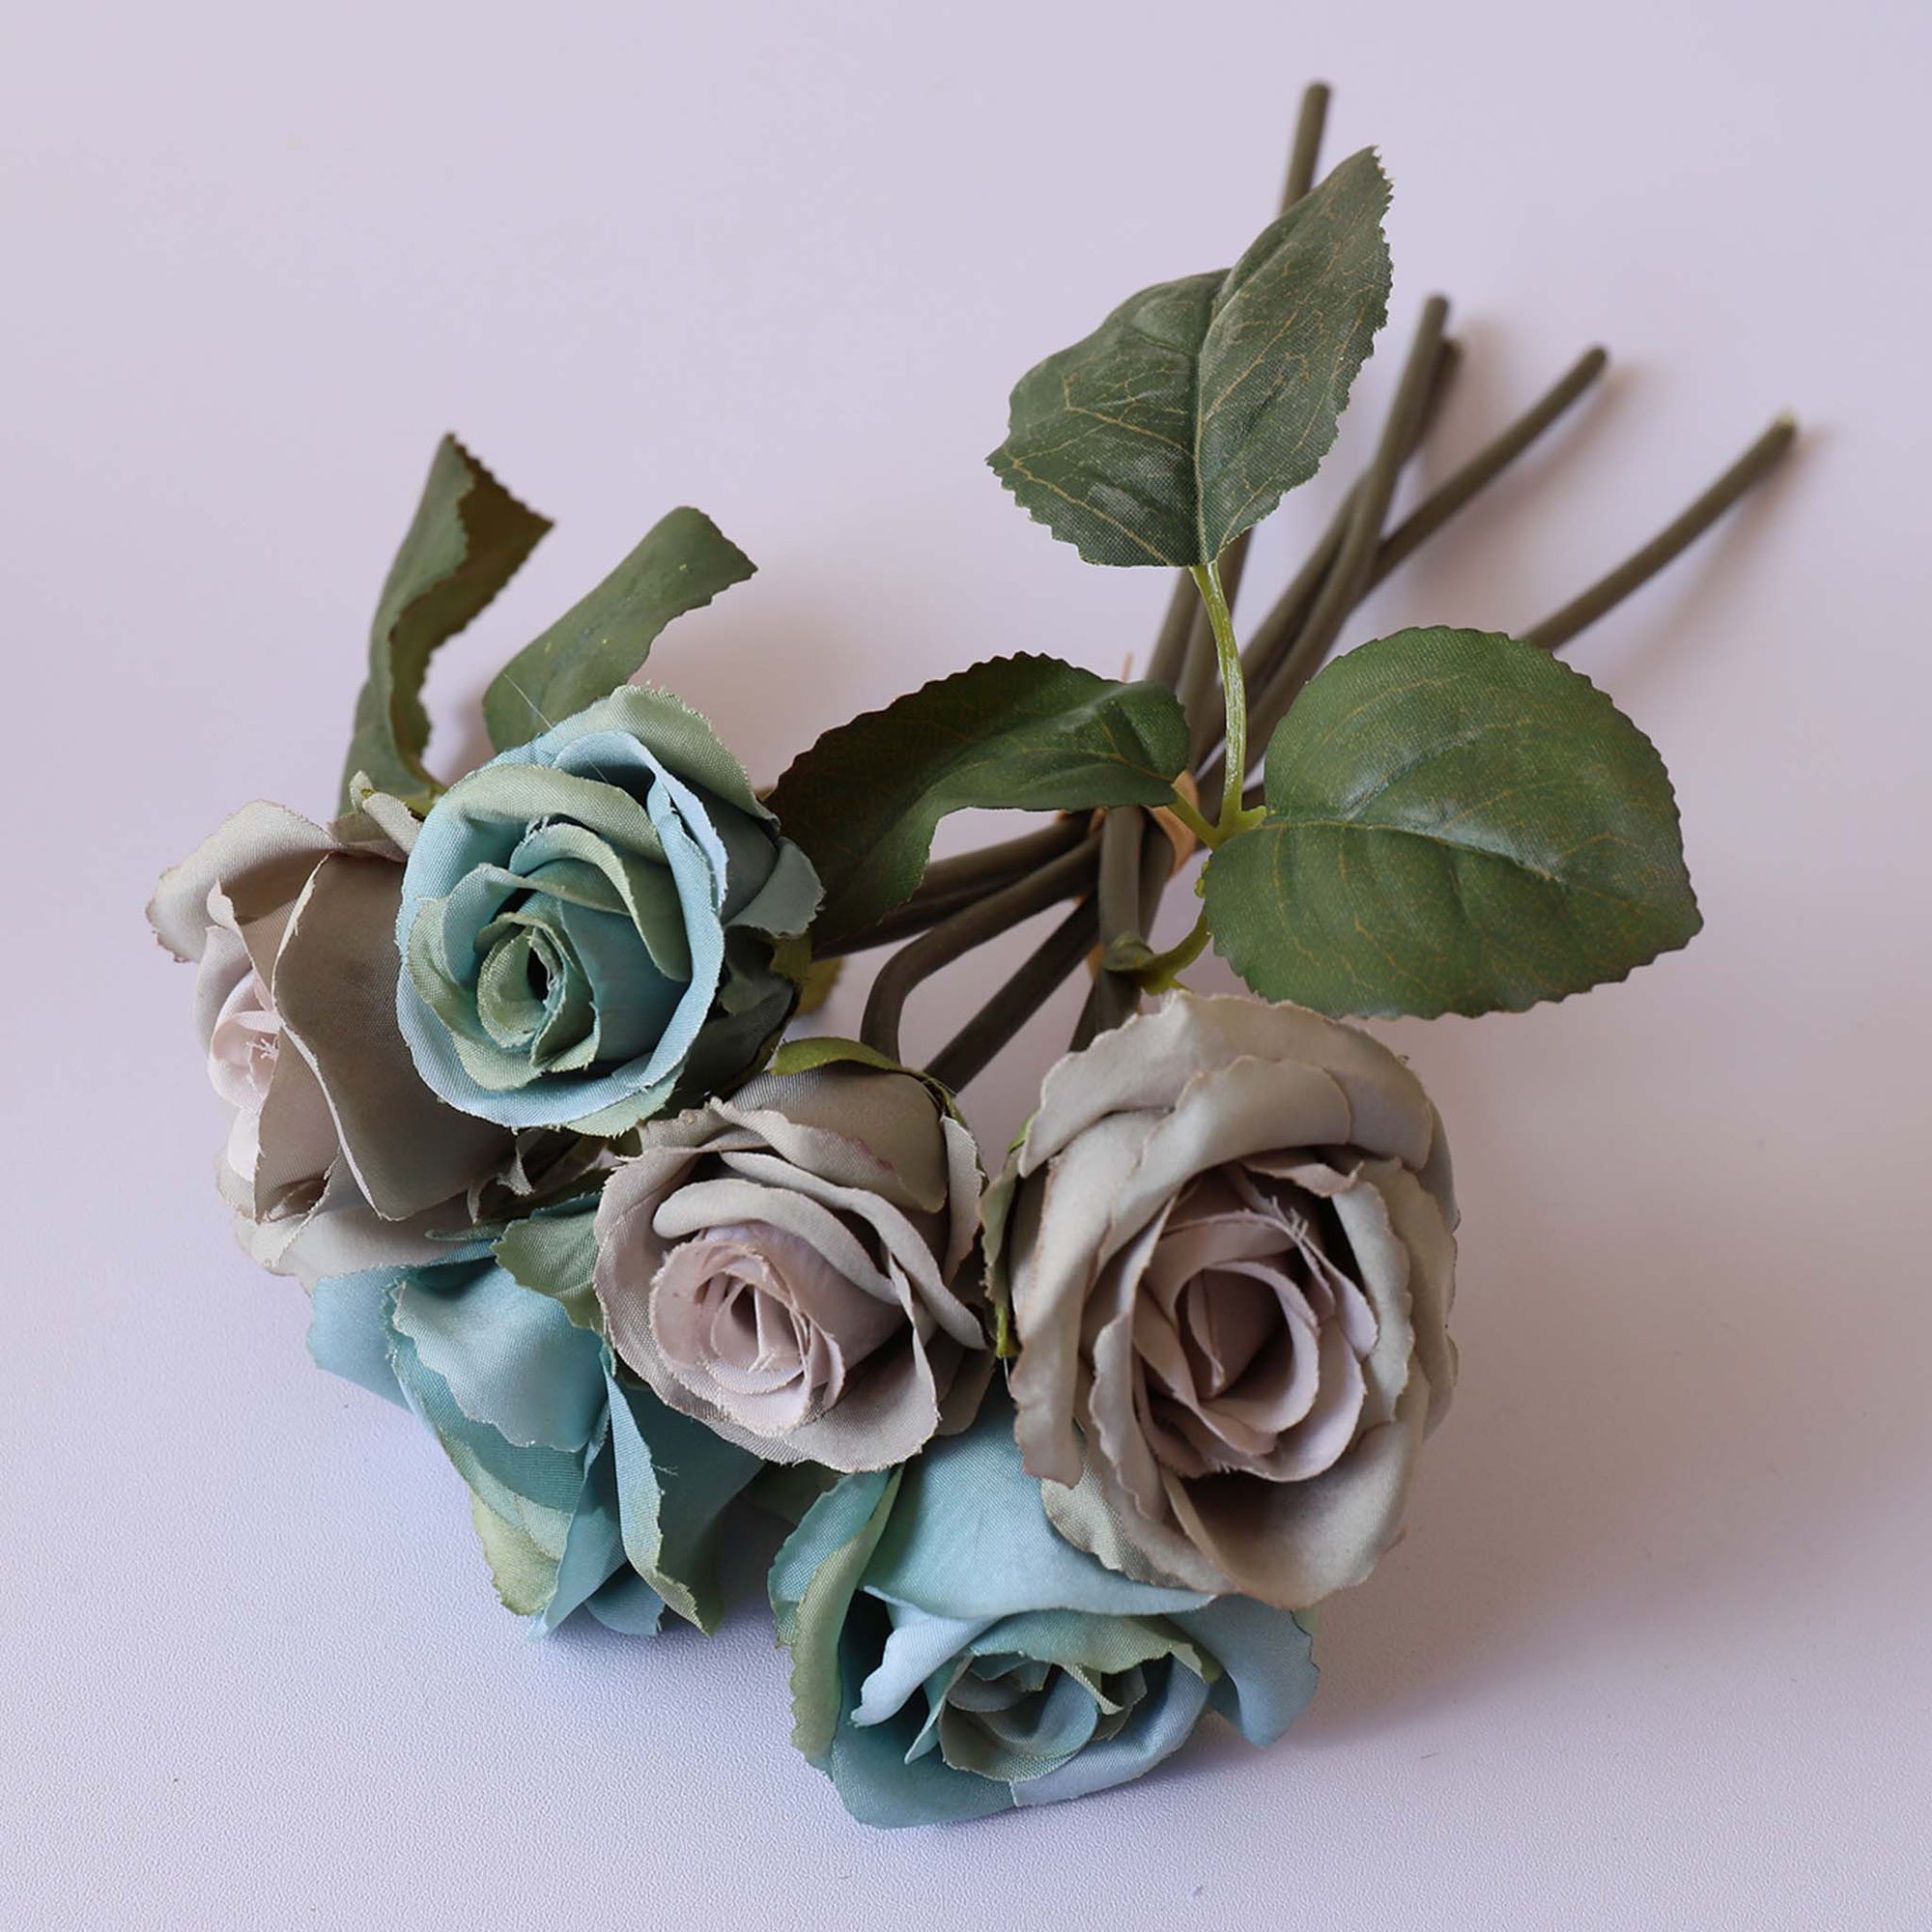 Fall Wedding Flowers Silk Rose Bouquet Vintage Colors For diy Crafts Gray Blue Bouquet